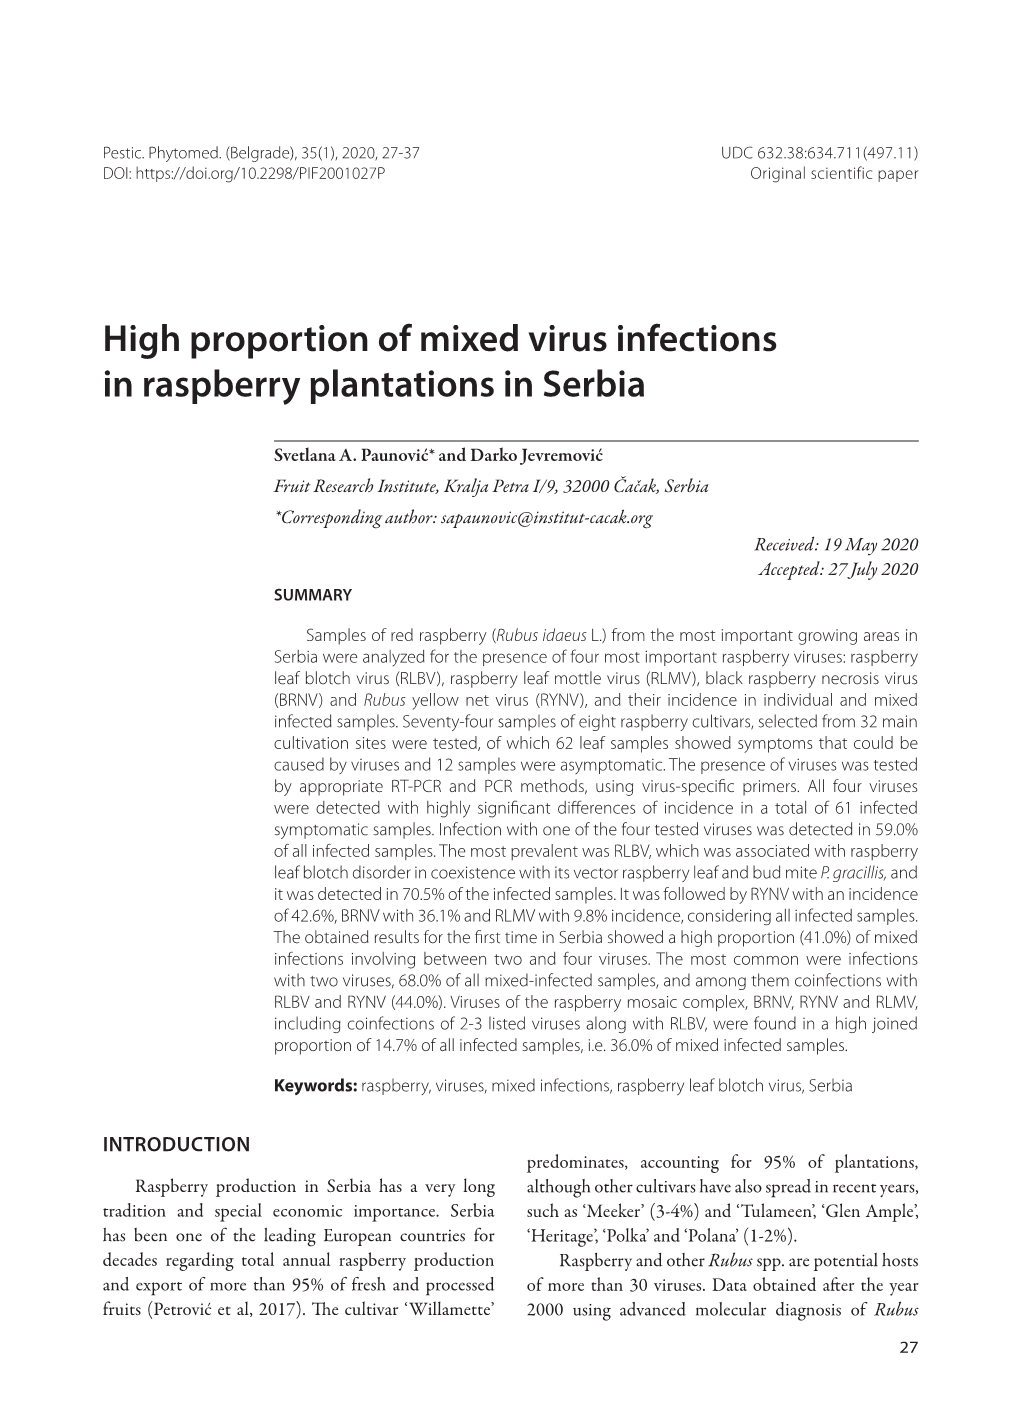 High Proportion of Mixed Virus Infections in Raspberry Plantations in Serbia